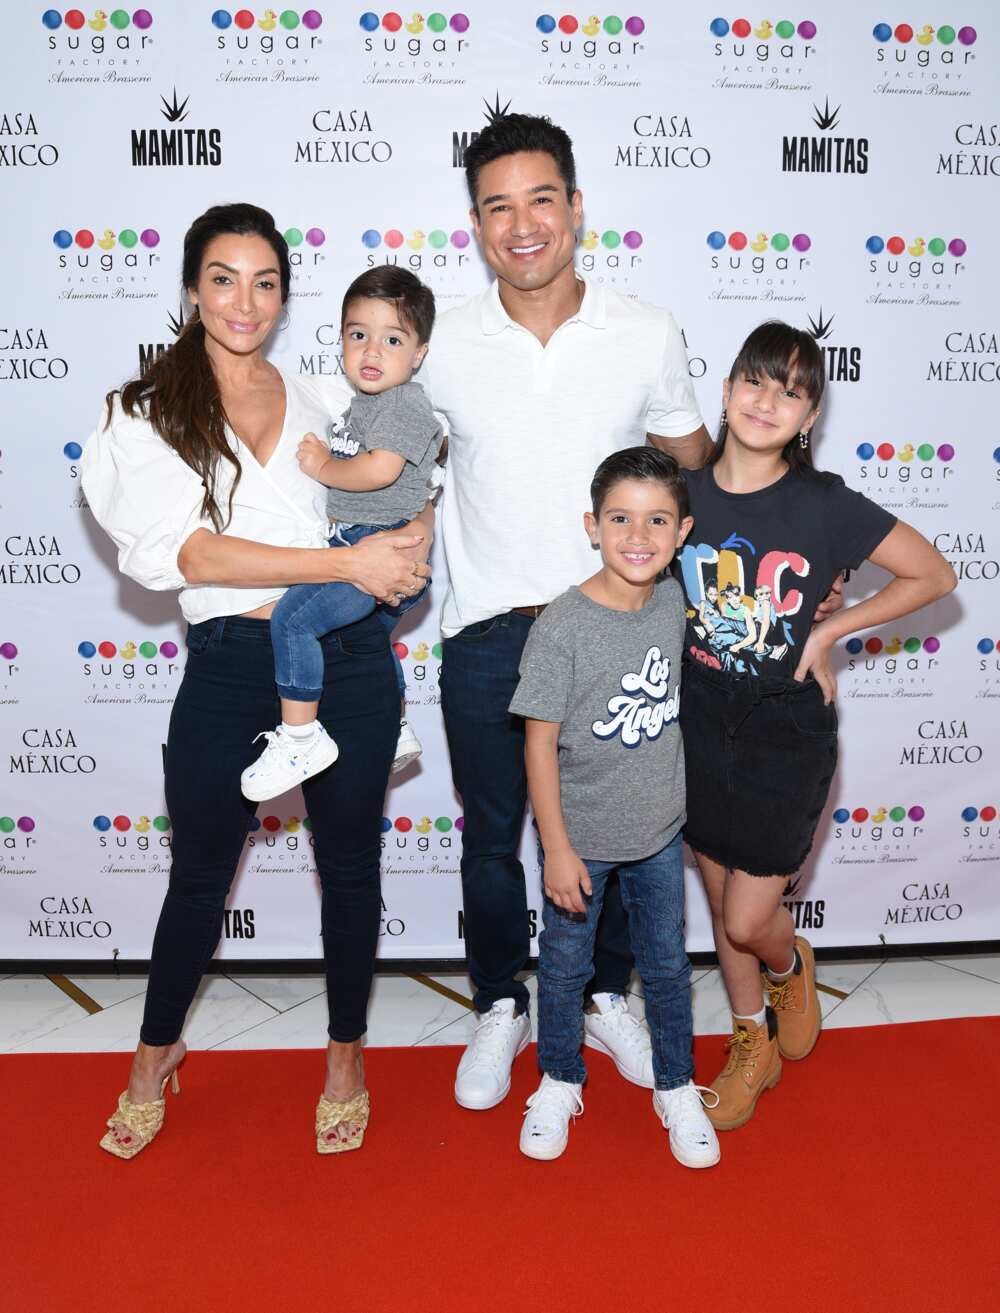 Wo is Mario Lopez's wife?